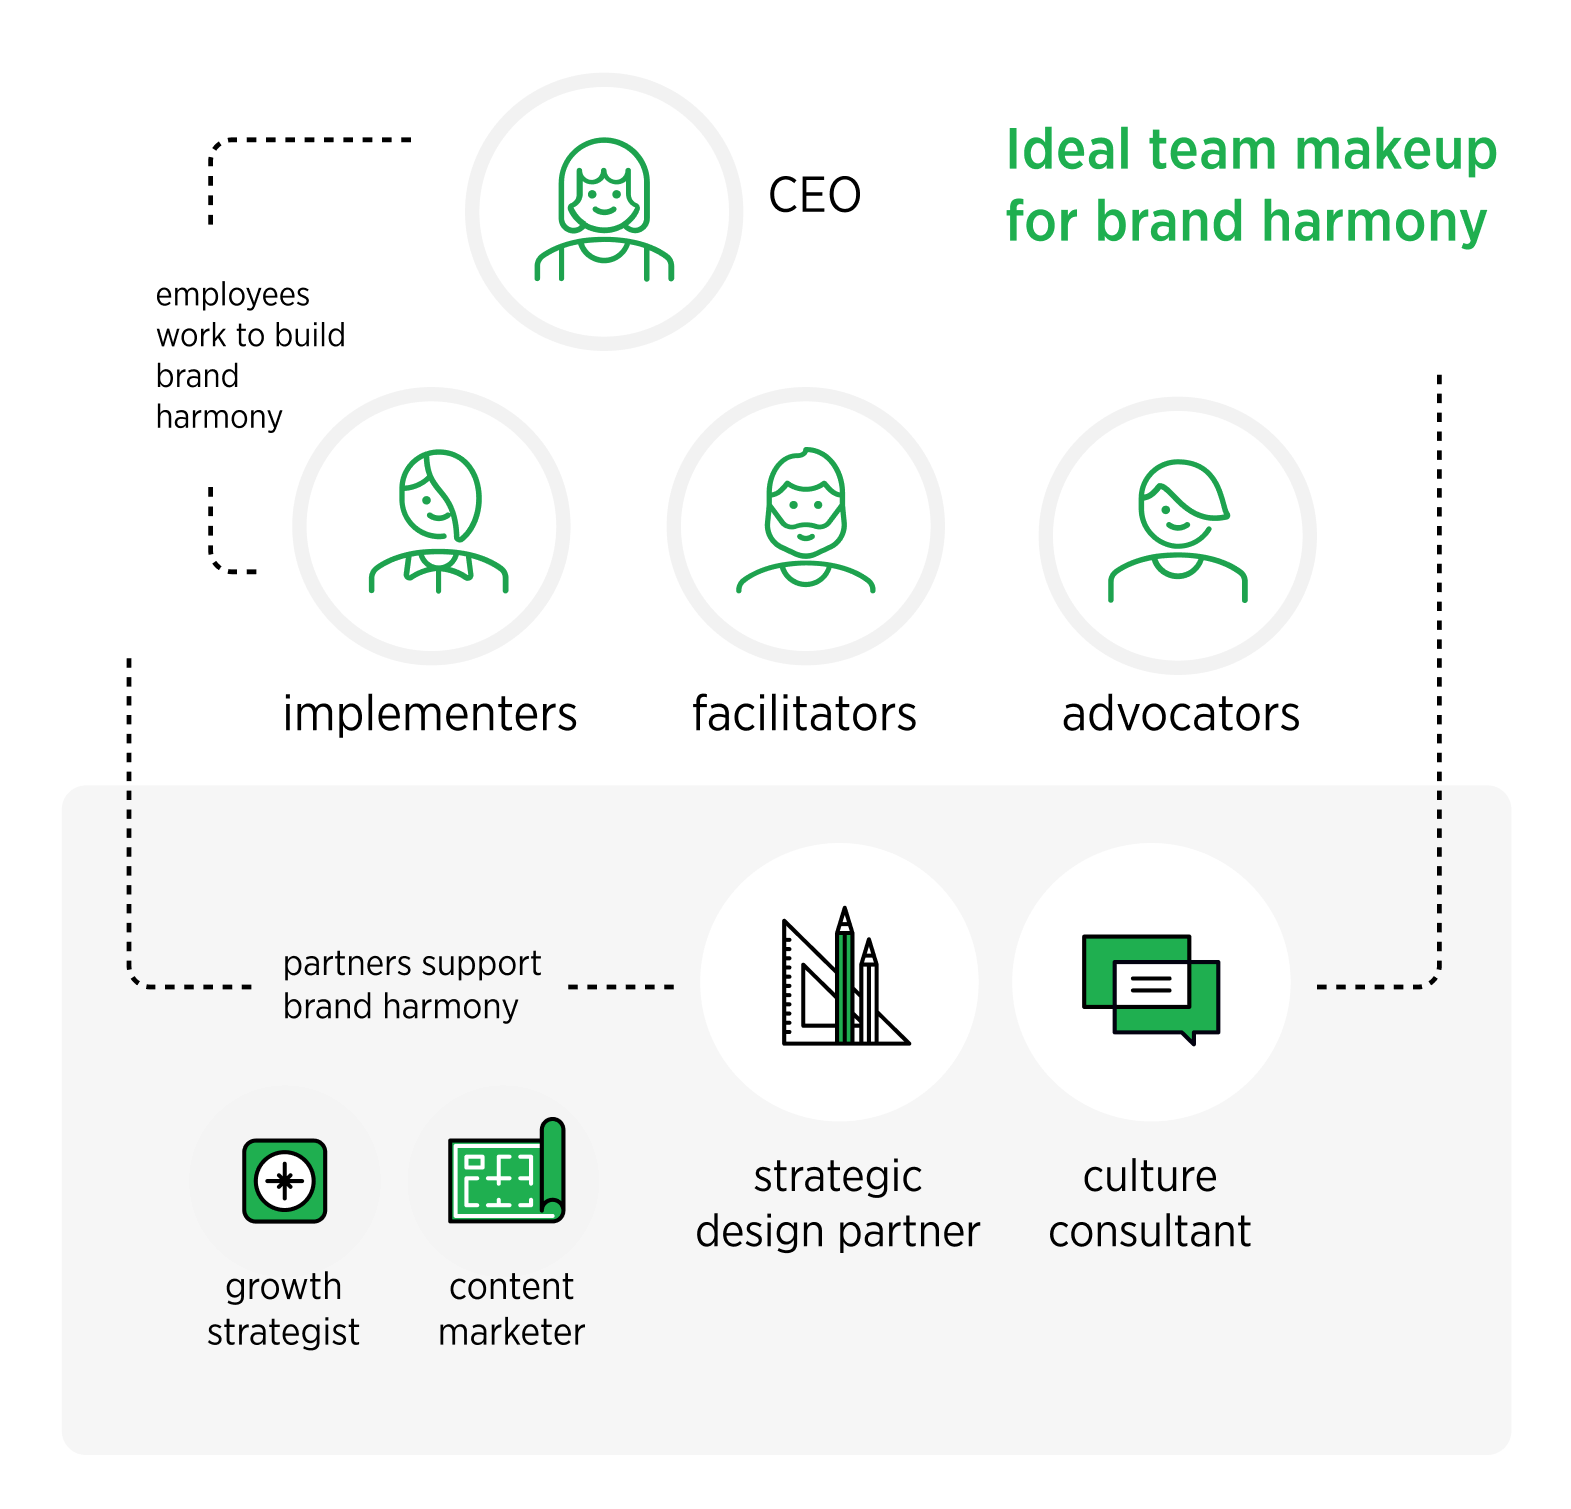 Diagram for ideal makeup of a team built to support brand harmony